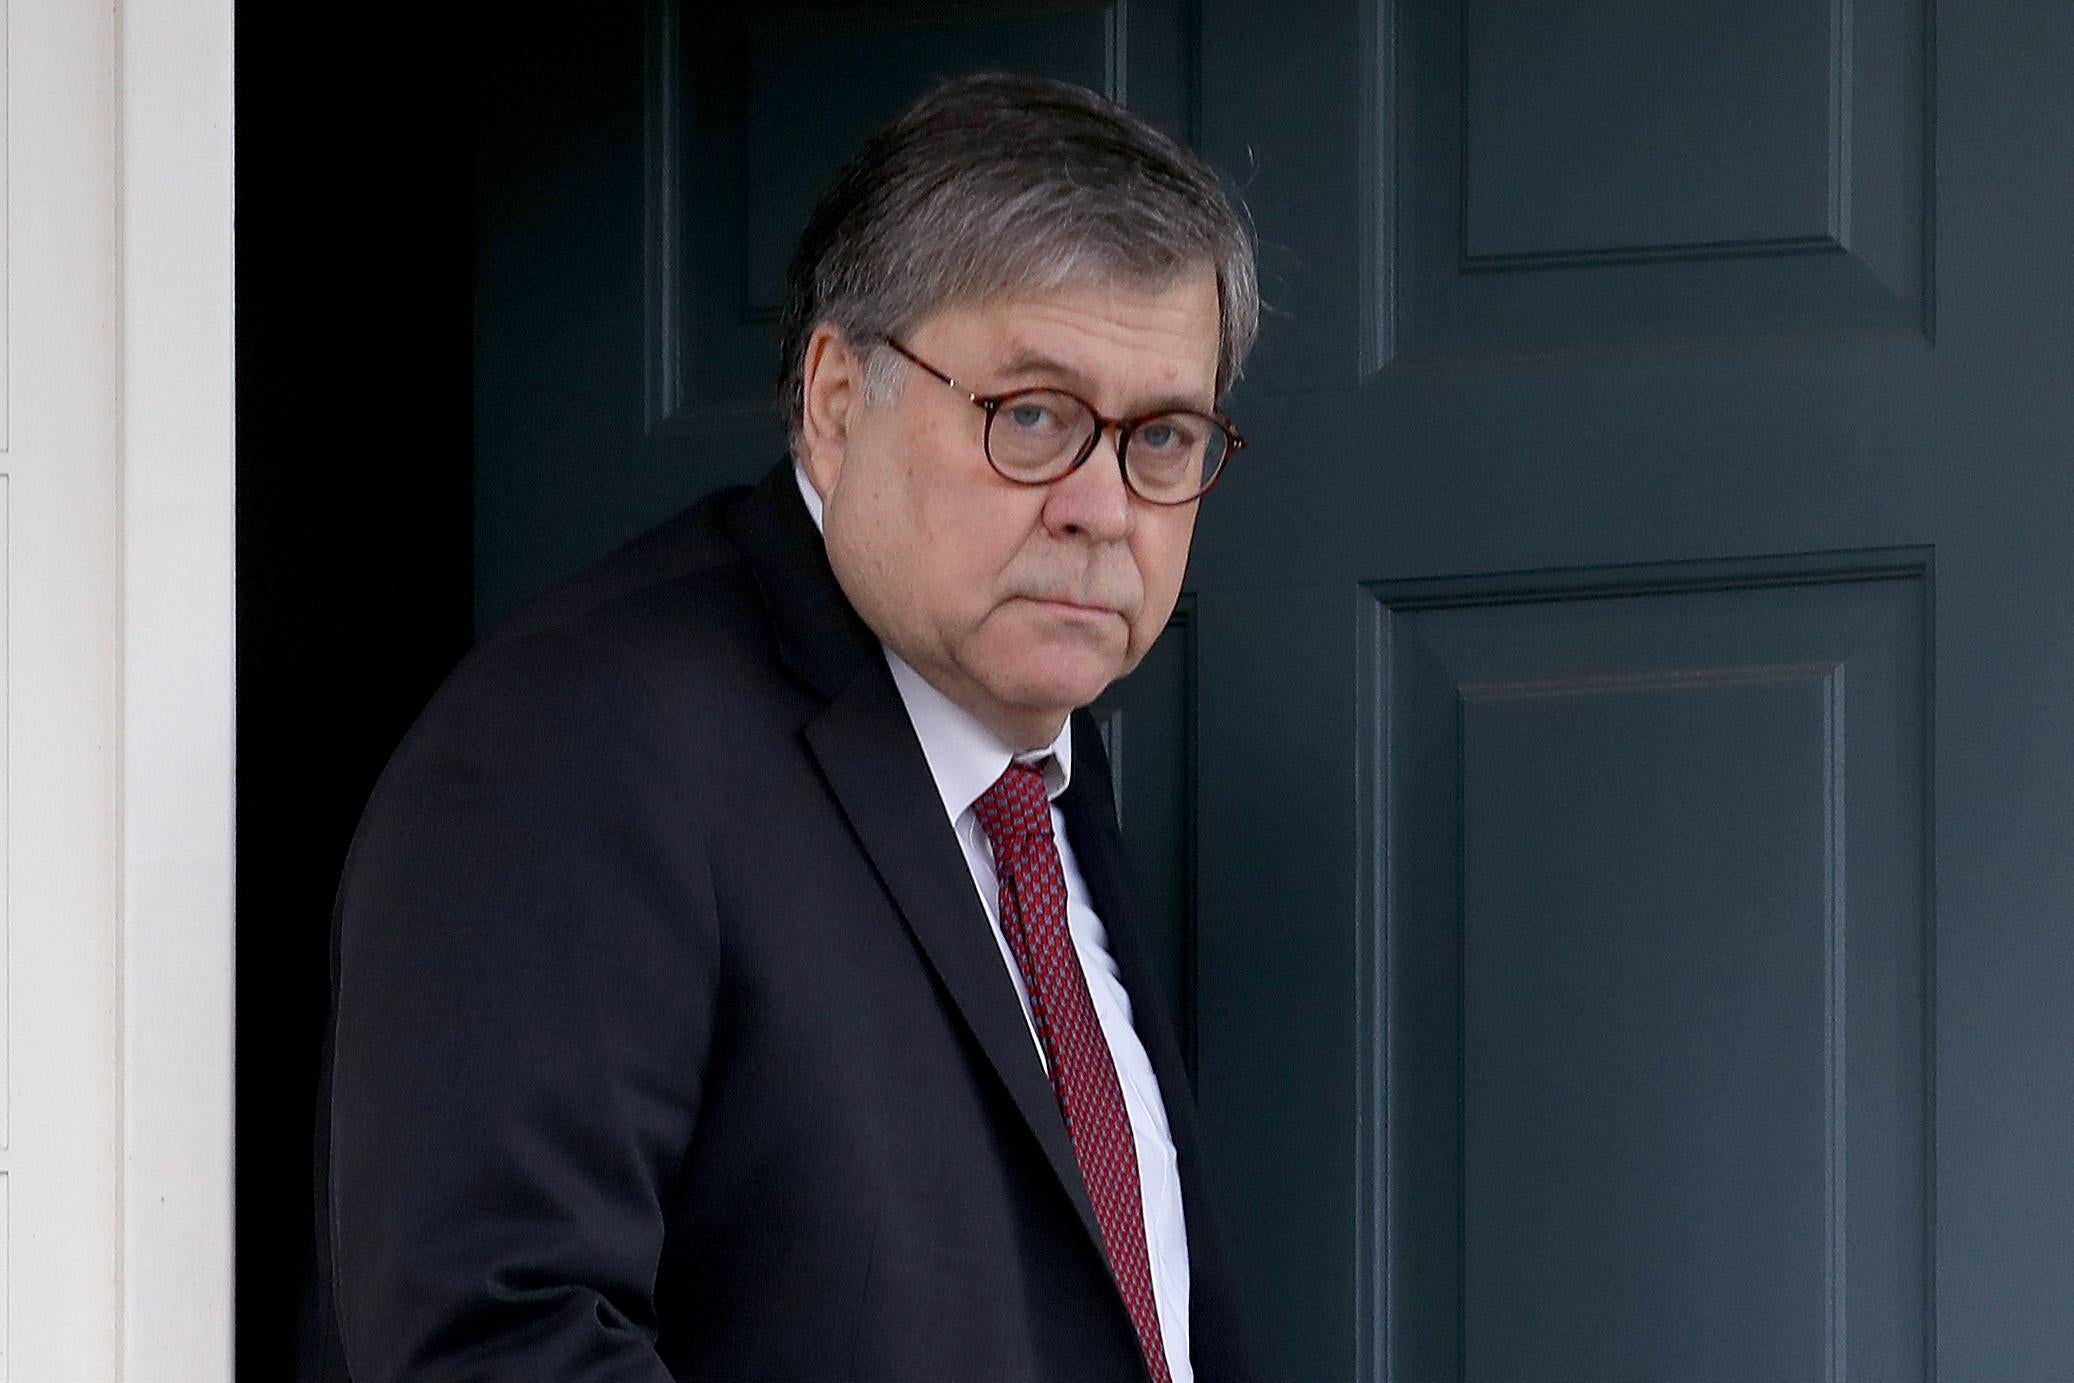 U.S. Attorney General William Barr departs his home on Friday in McLean, Virginia.